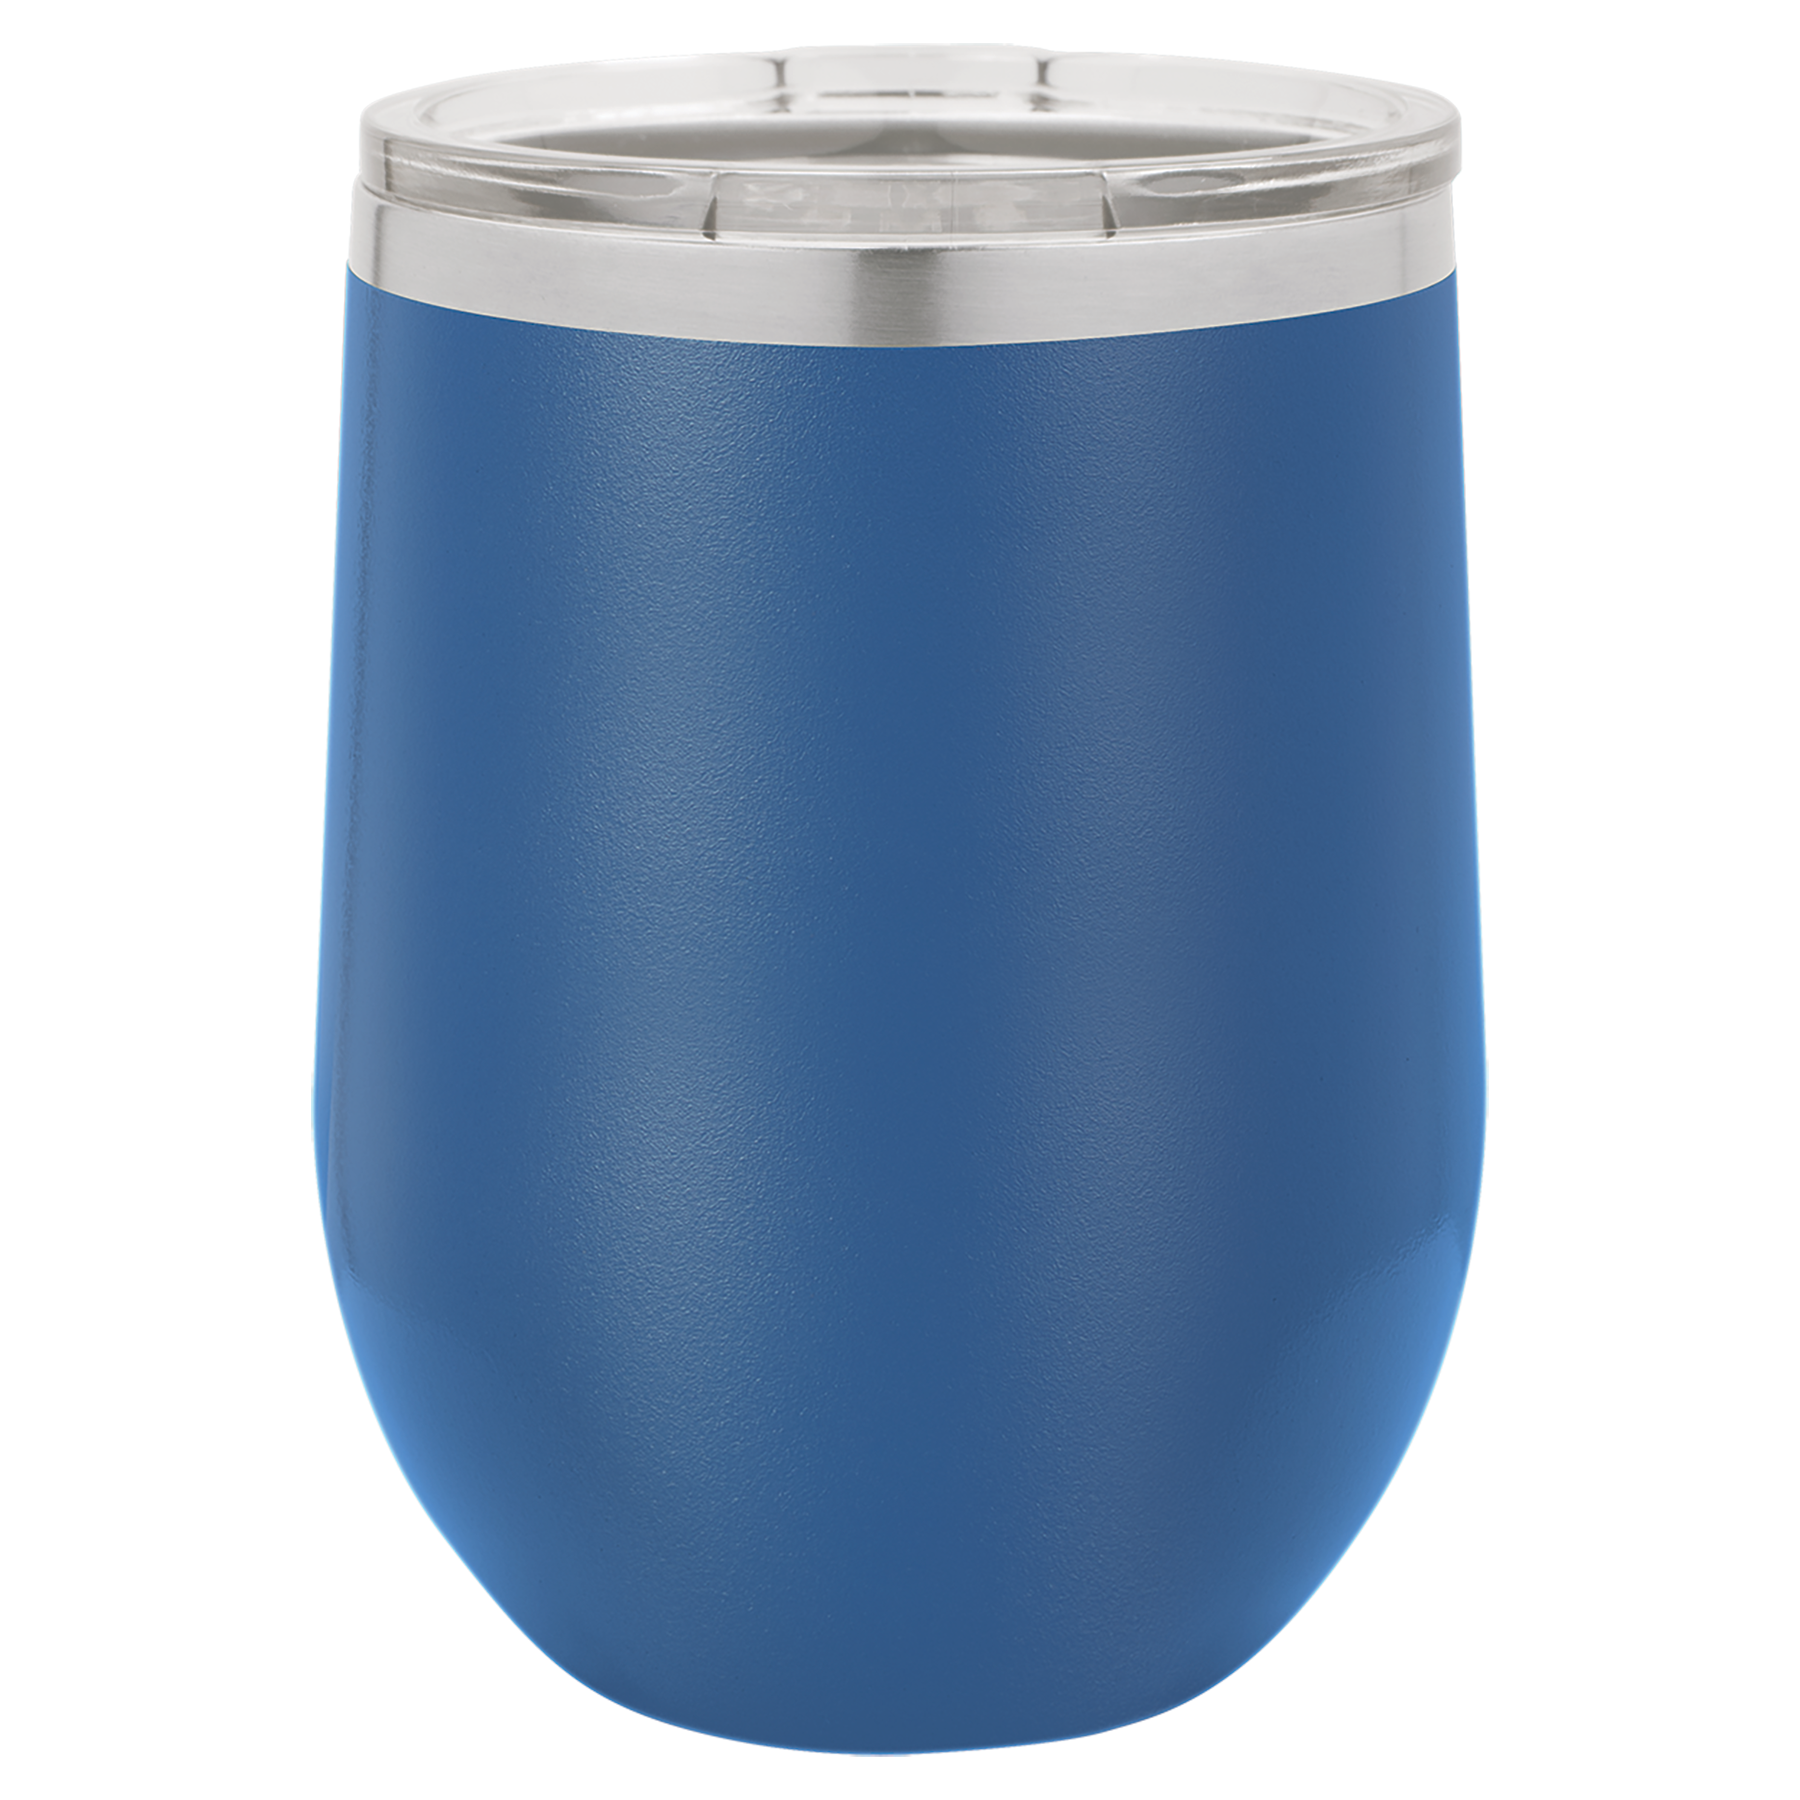 Engraved Blue 12 oz. Stemless Wine Tumbler. Double-wall, vacuum insulation with a clear lid. They are 2X heat and cold resistant compared to glass or plastic wine glasses. Polar Camels are made from 18/8 gauge stainless steel (18% chromium/8% nickel) - also know as Type 304 Food Grade. 